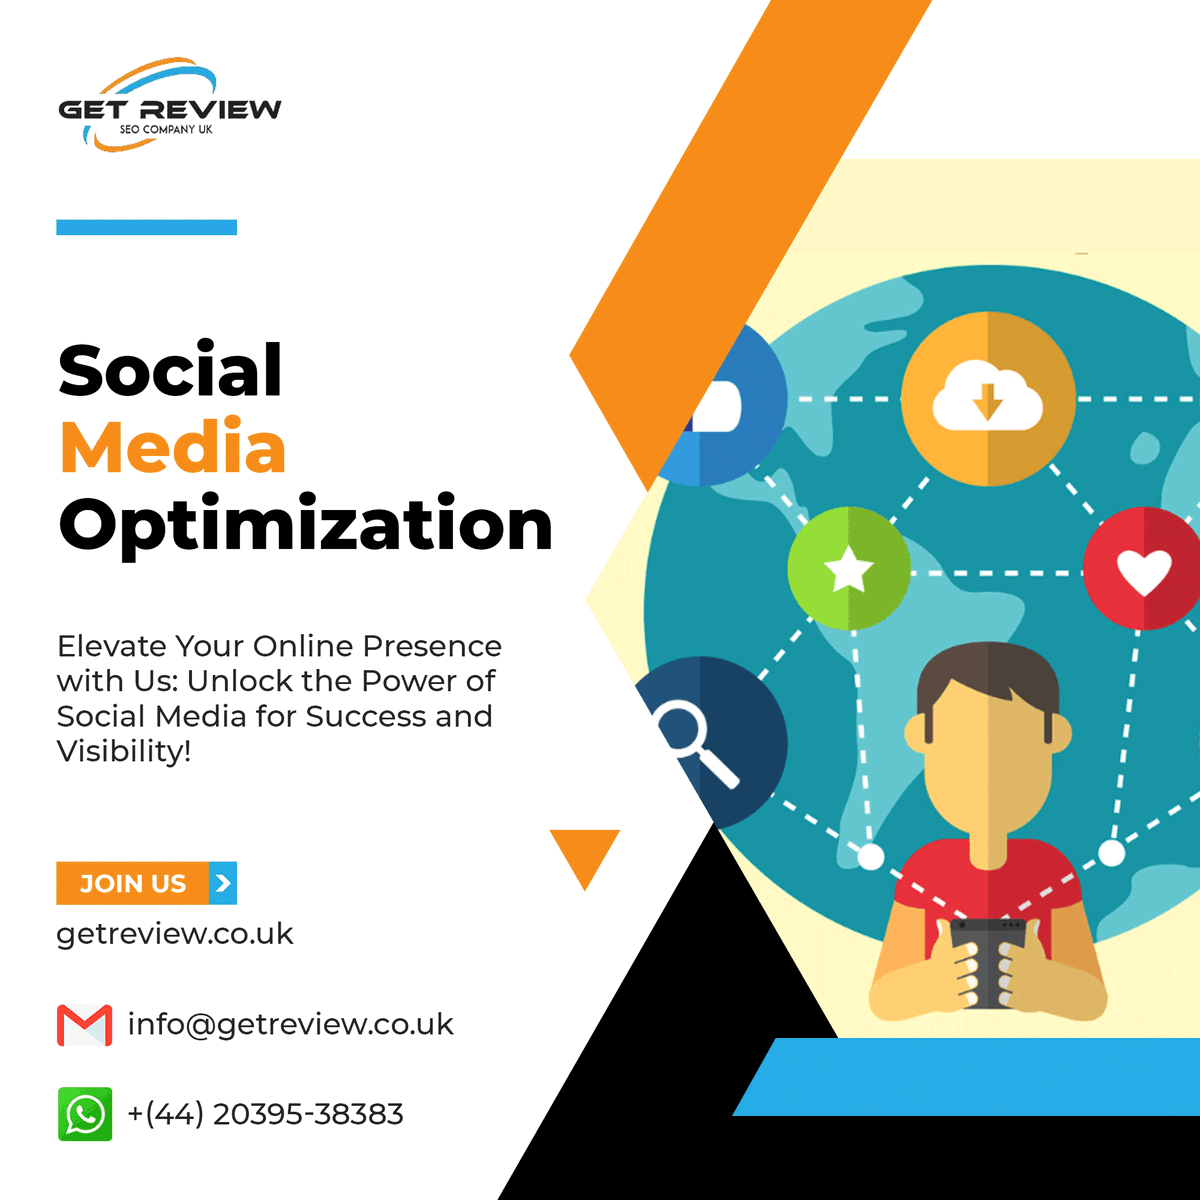 SMO Service that Boosts 🏃‍♀️ Your Social Media Presence 🔍 and Engagement.

For more info visit🌐: bit.ly/3ZoGChM
Call☎️: + (44) 20395-38383
For USA/Canada☎️: +1 (442) 228-2737
Email📧: info@getreview.co.uk

#Socialmediamanagement #Socialadvertising #Influencermarketing